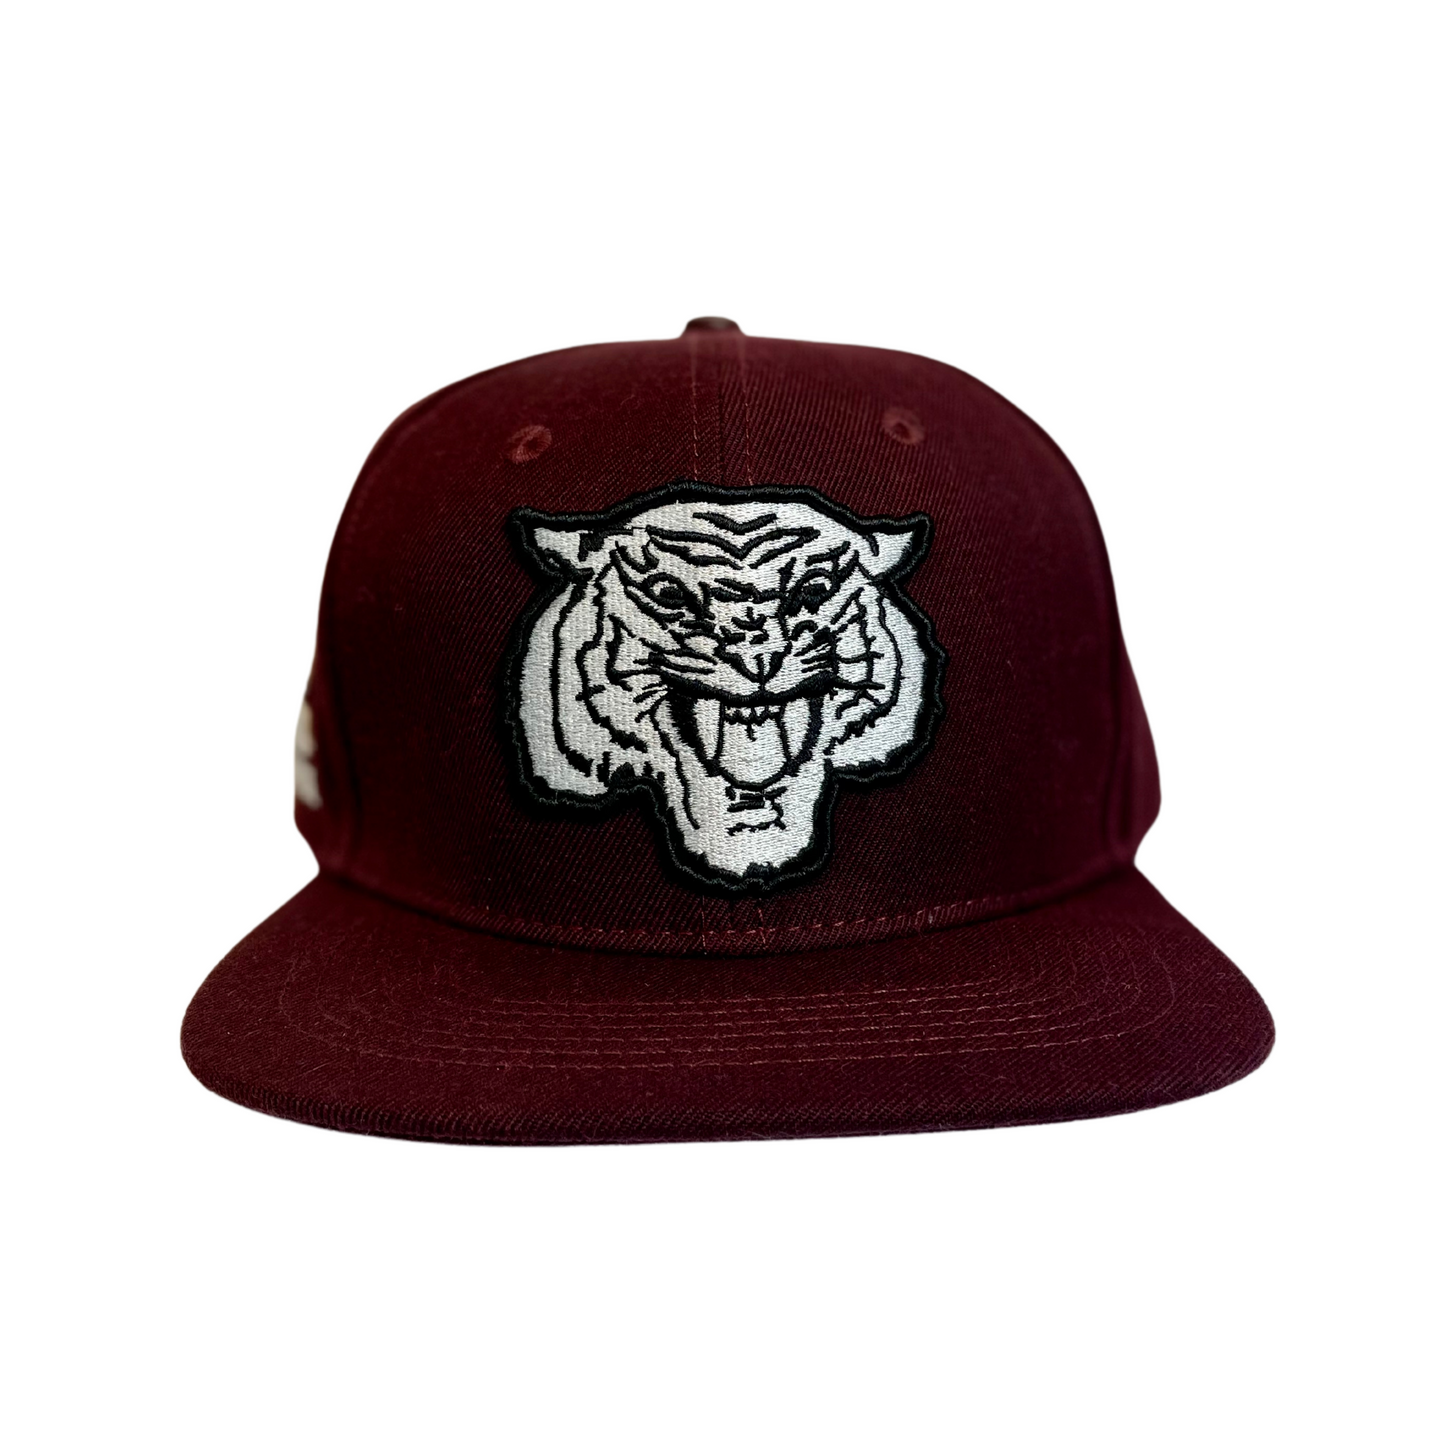 Morehouse College All Star Logo Snapback Hat